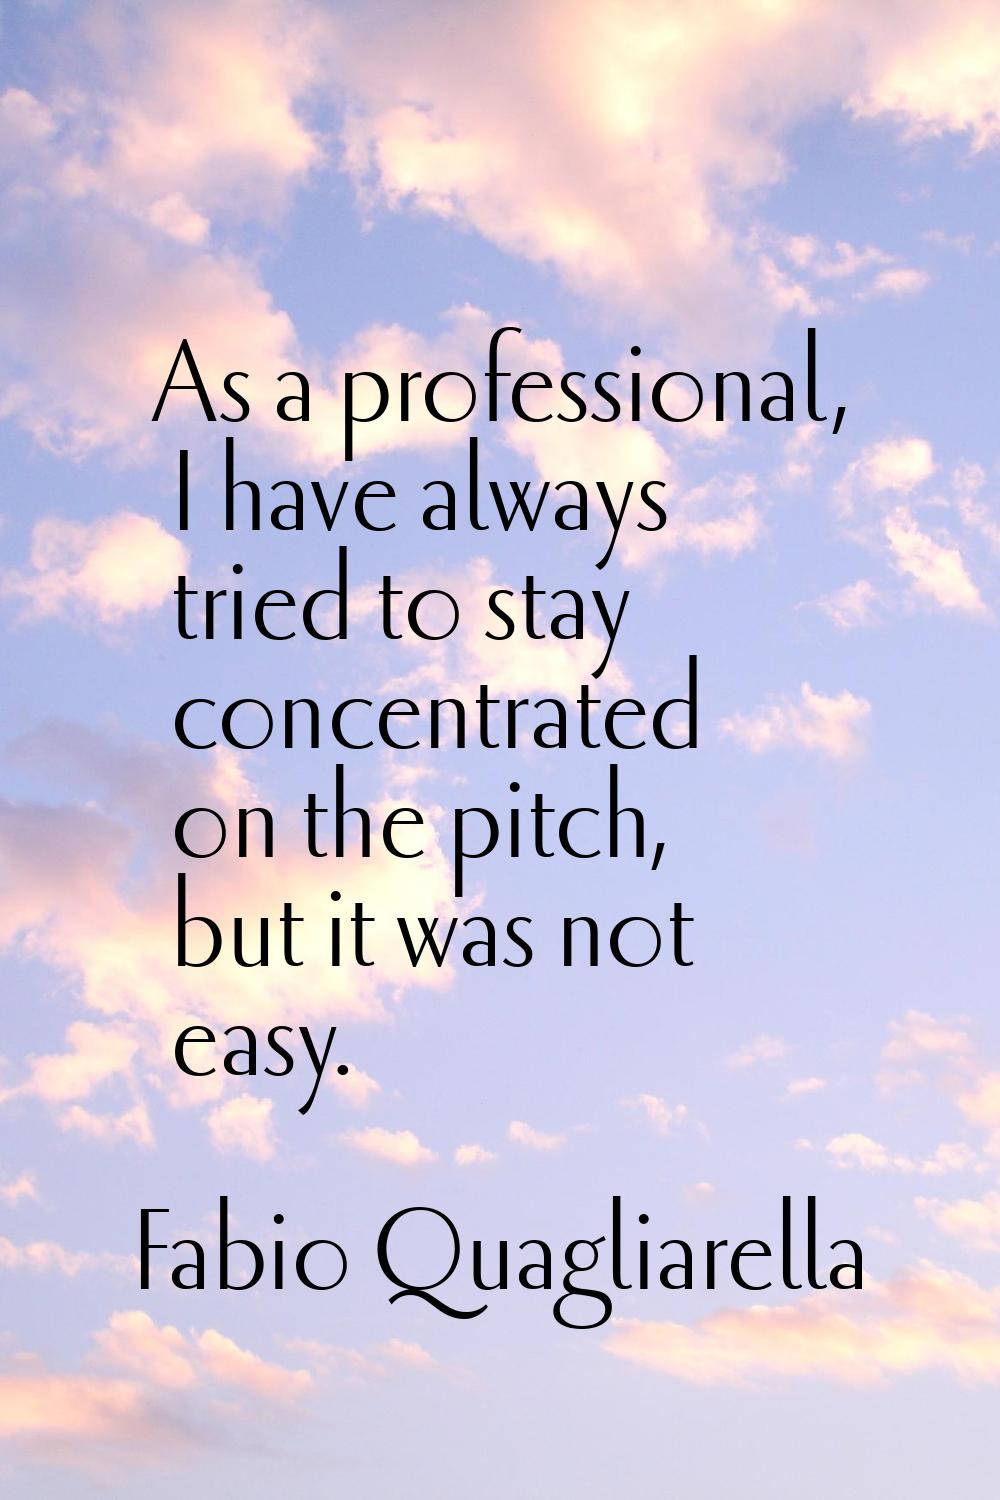 As a professional, I have always tried to stay concentrated on the pitch, but it was not easy.